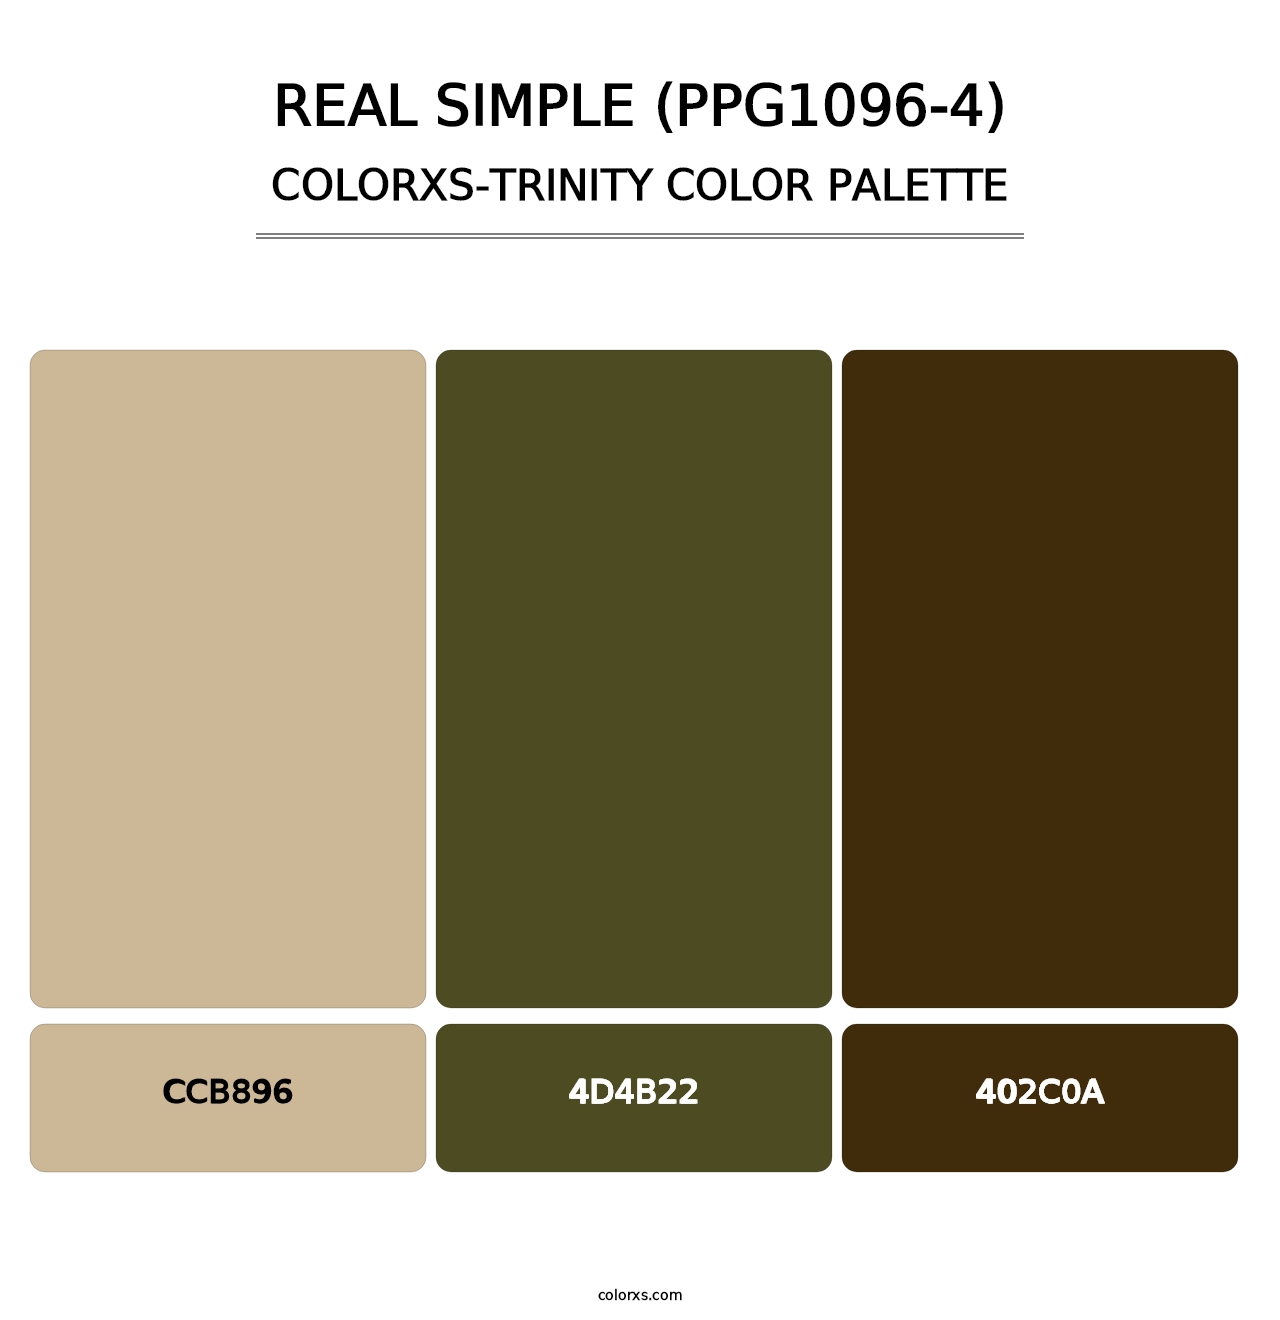 Real Simple (PPG1096-4) - Colorxs Trinity Palette